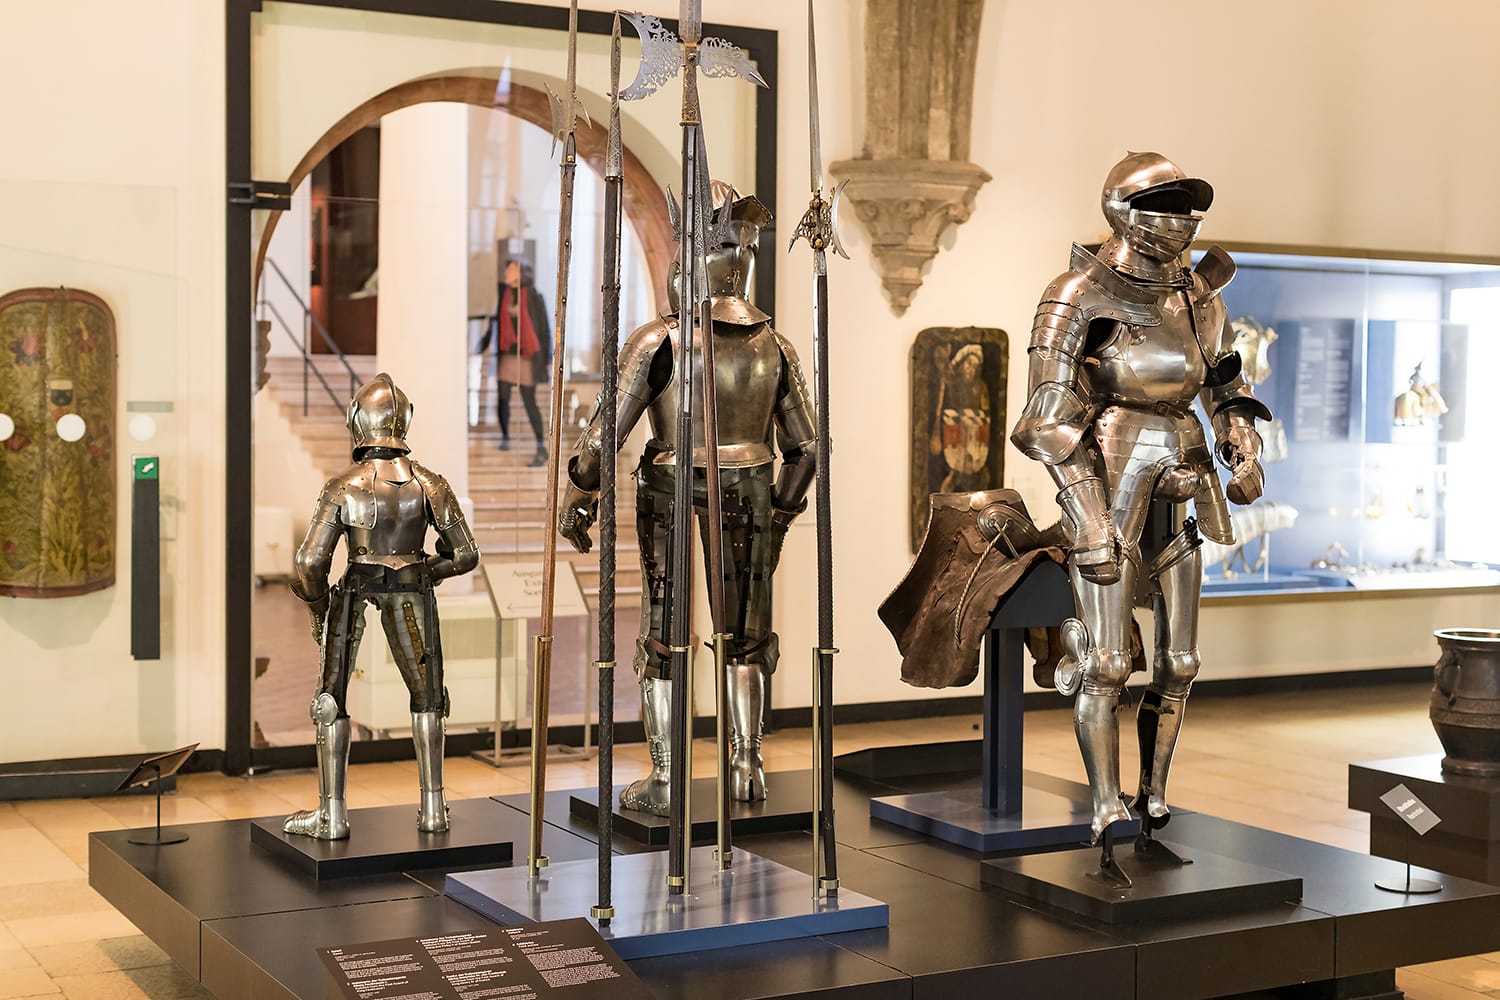 The exposition of medieval armor and knight knights presented in the Bavarian National Museum in Munich. 